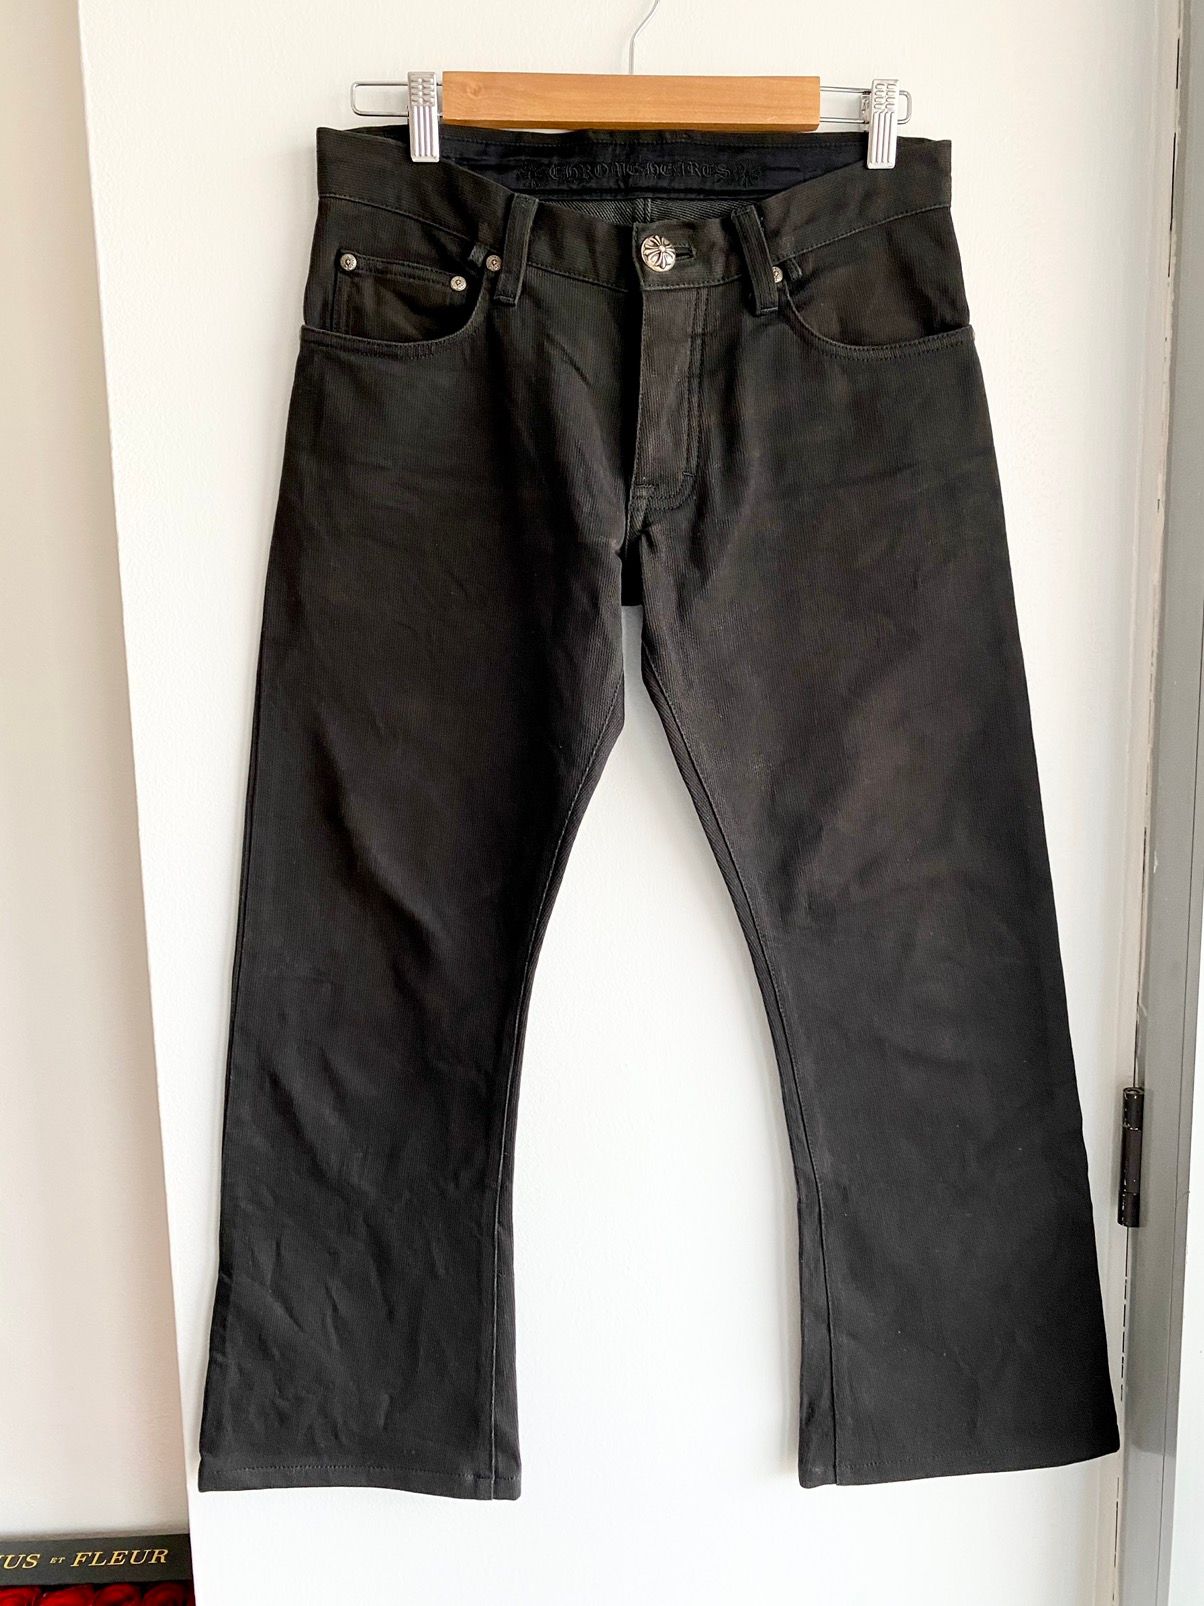 Chrome Hearts Cropped Skater Chino Corduroy Pants Jeans